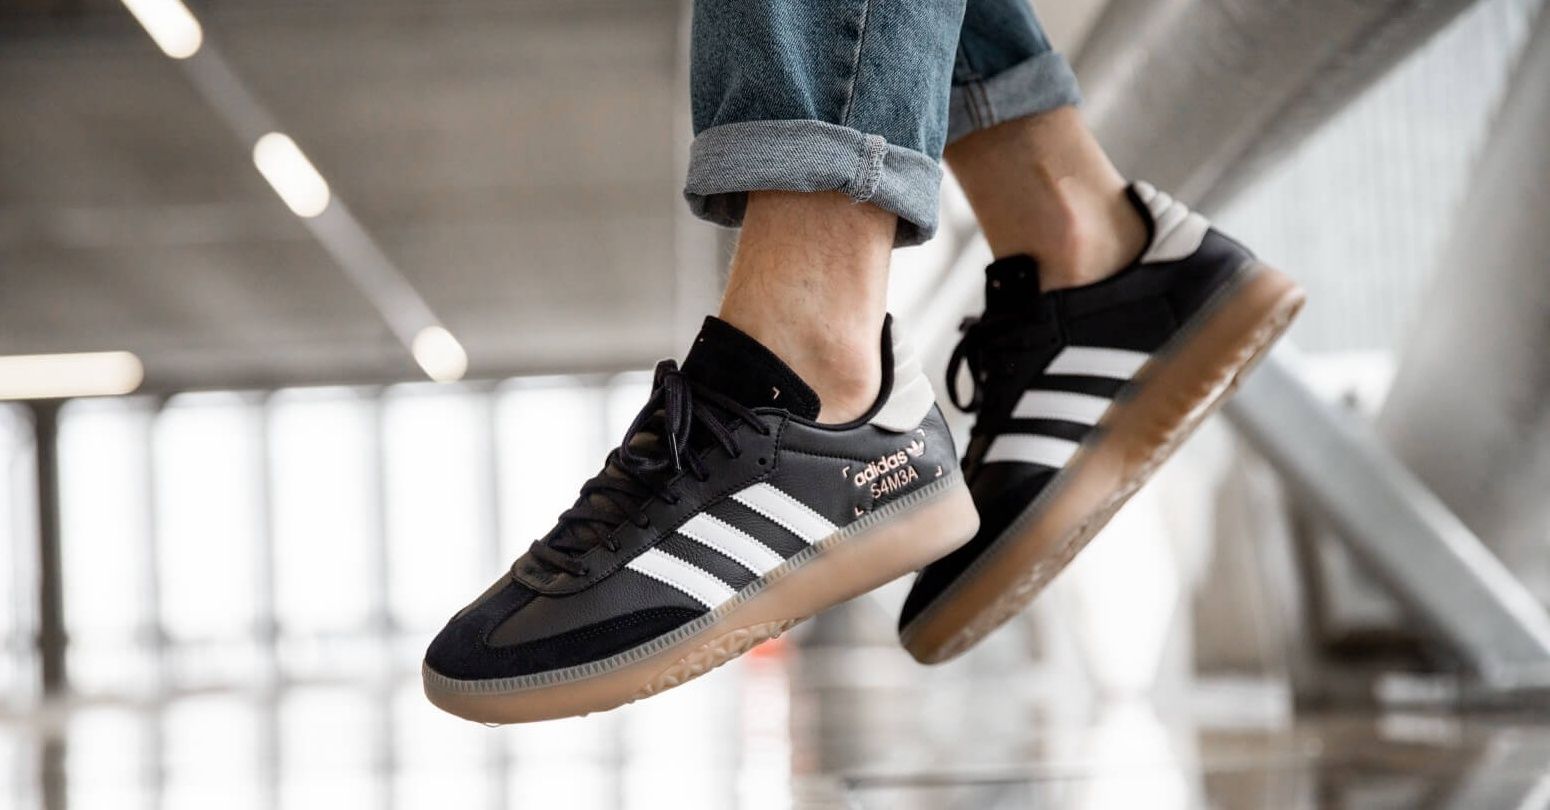 A the Samba, the sneakers linking football and fashion